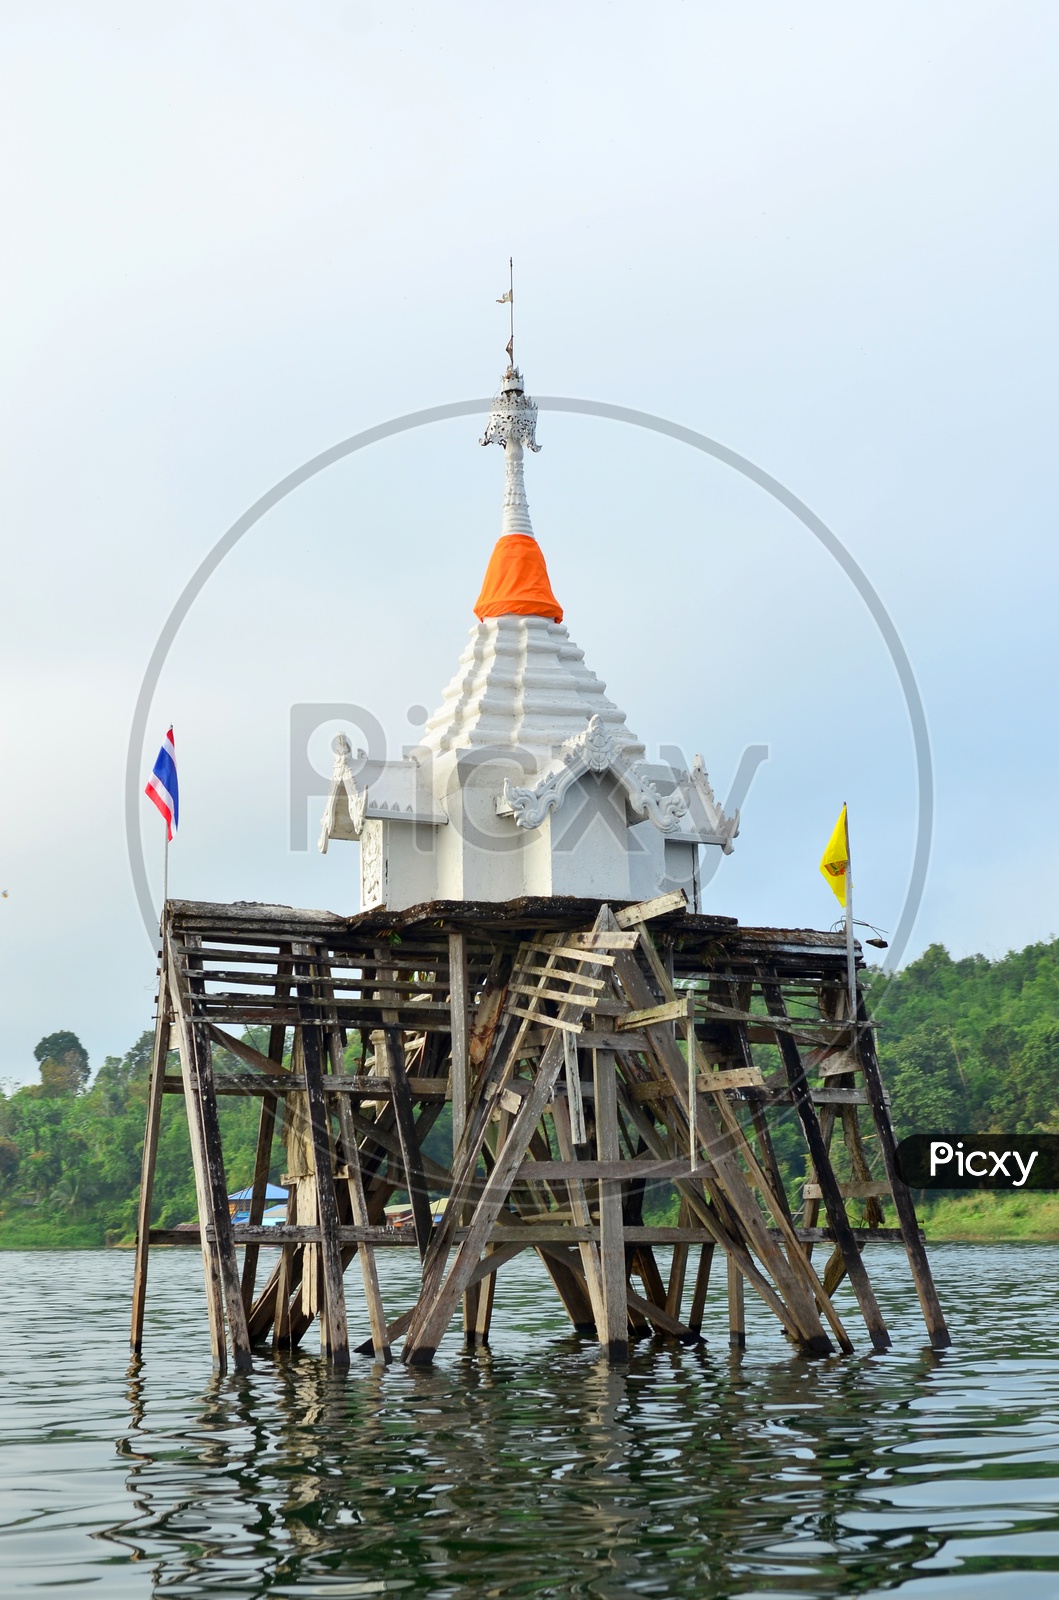 View of Pagoda in the Sangklaburi river of Thailand